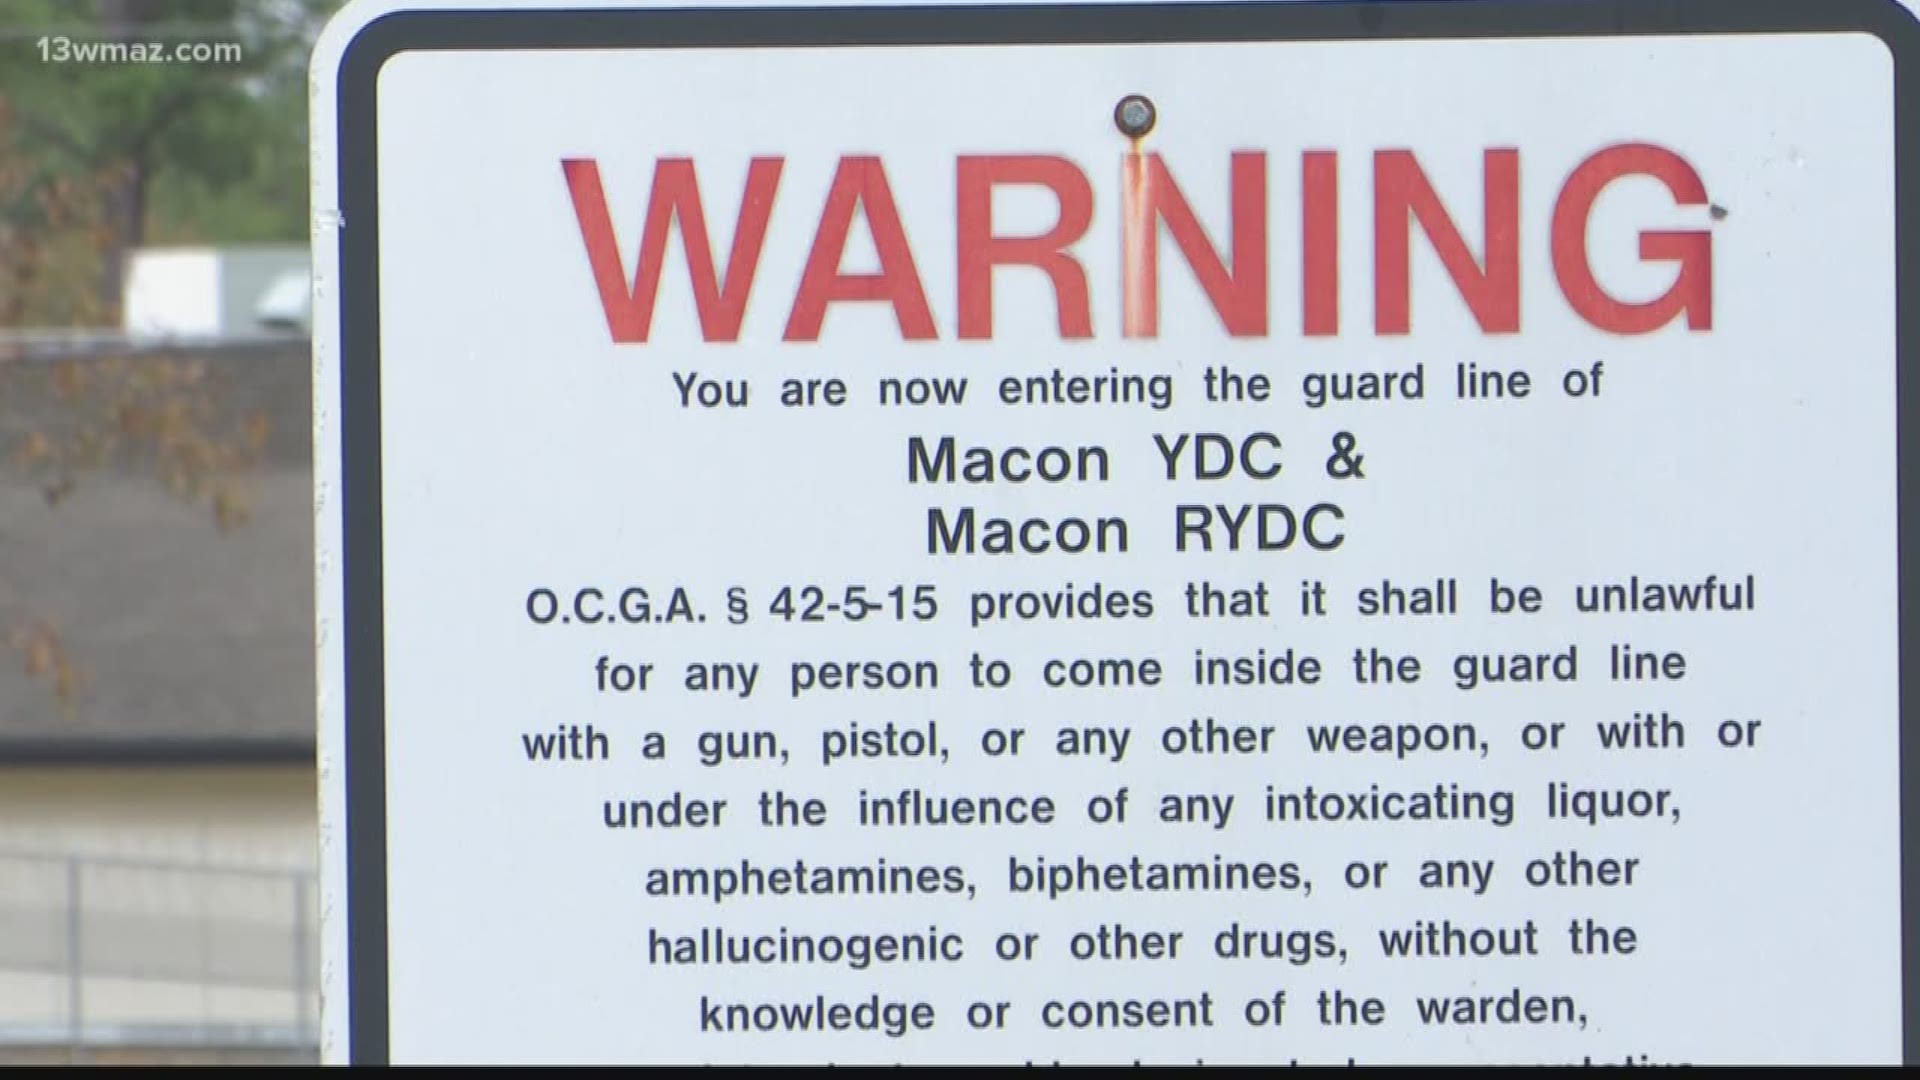 The US Department of Justice says the Macon Youth Detention Center's record is one of the worst in the country.